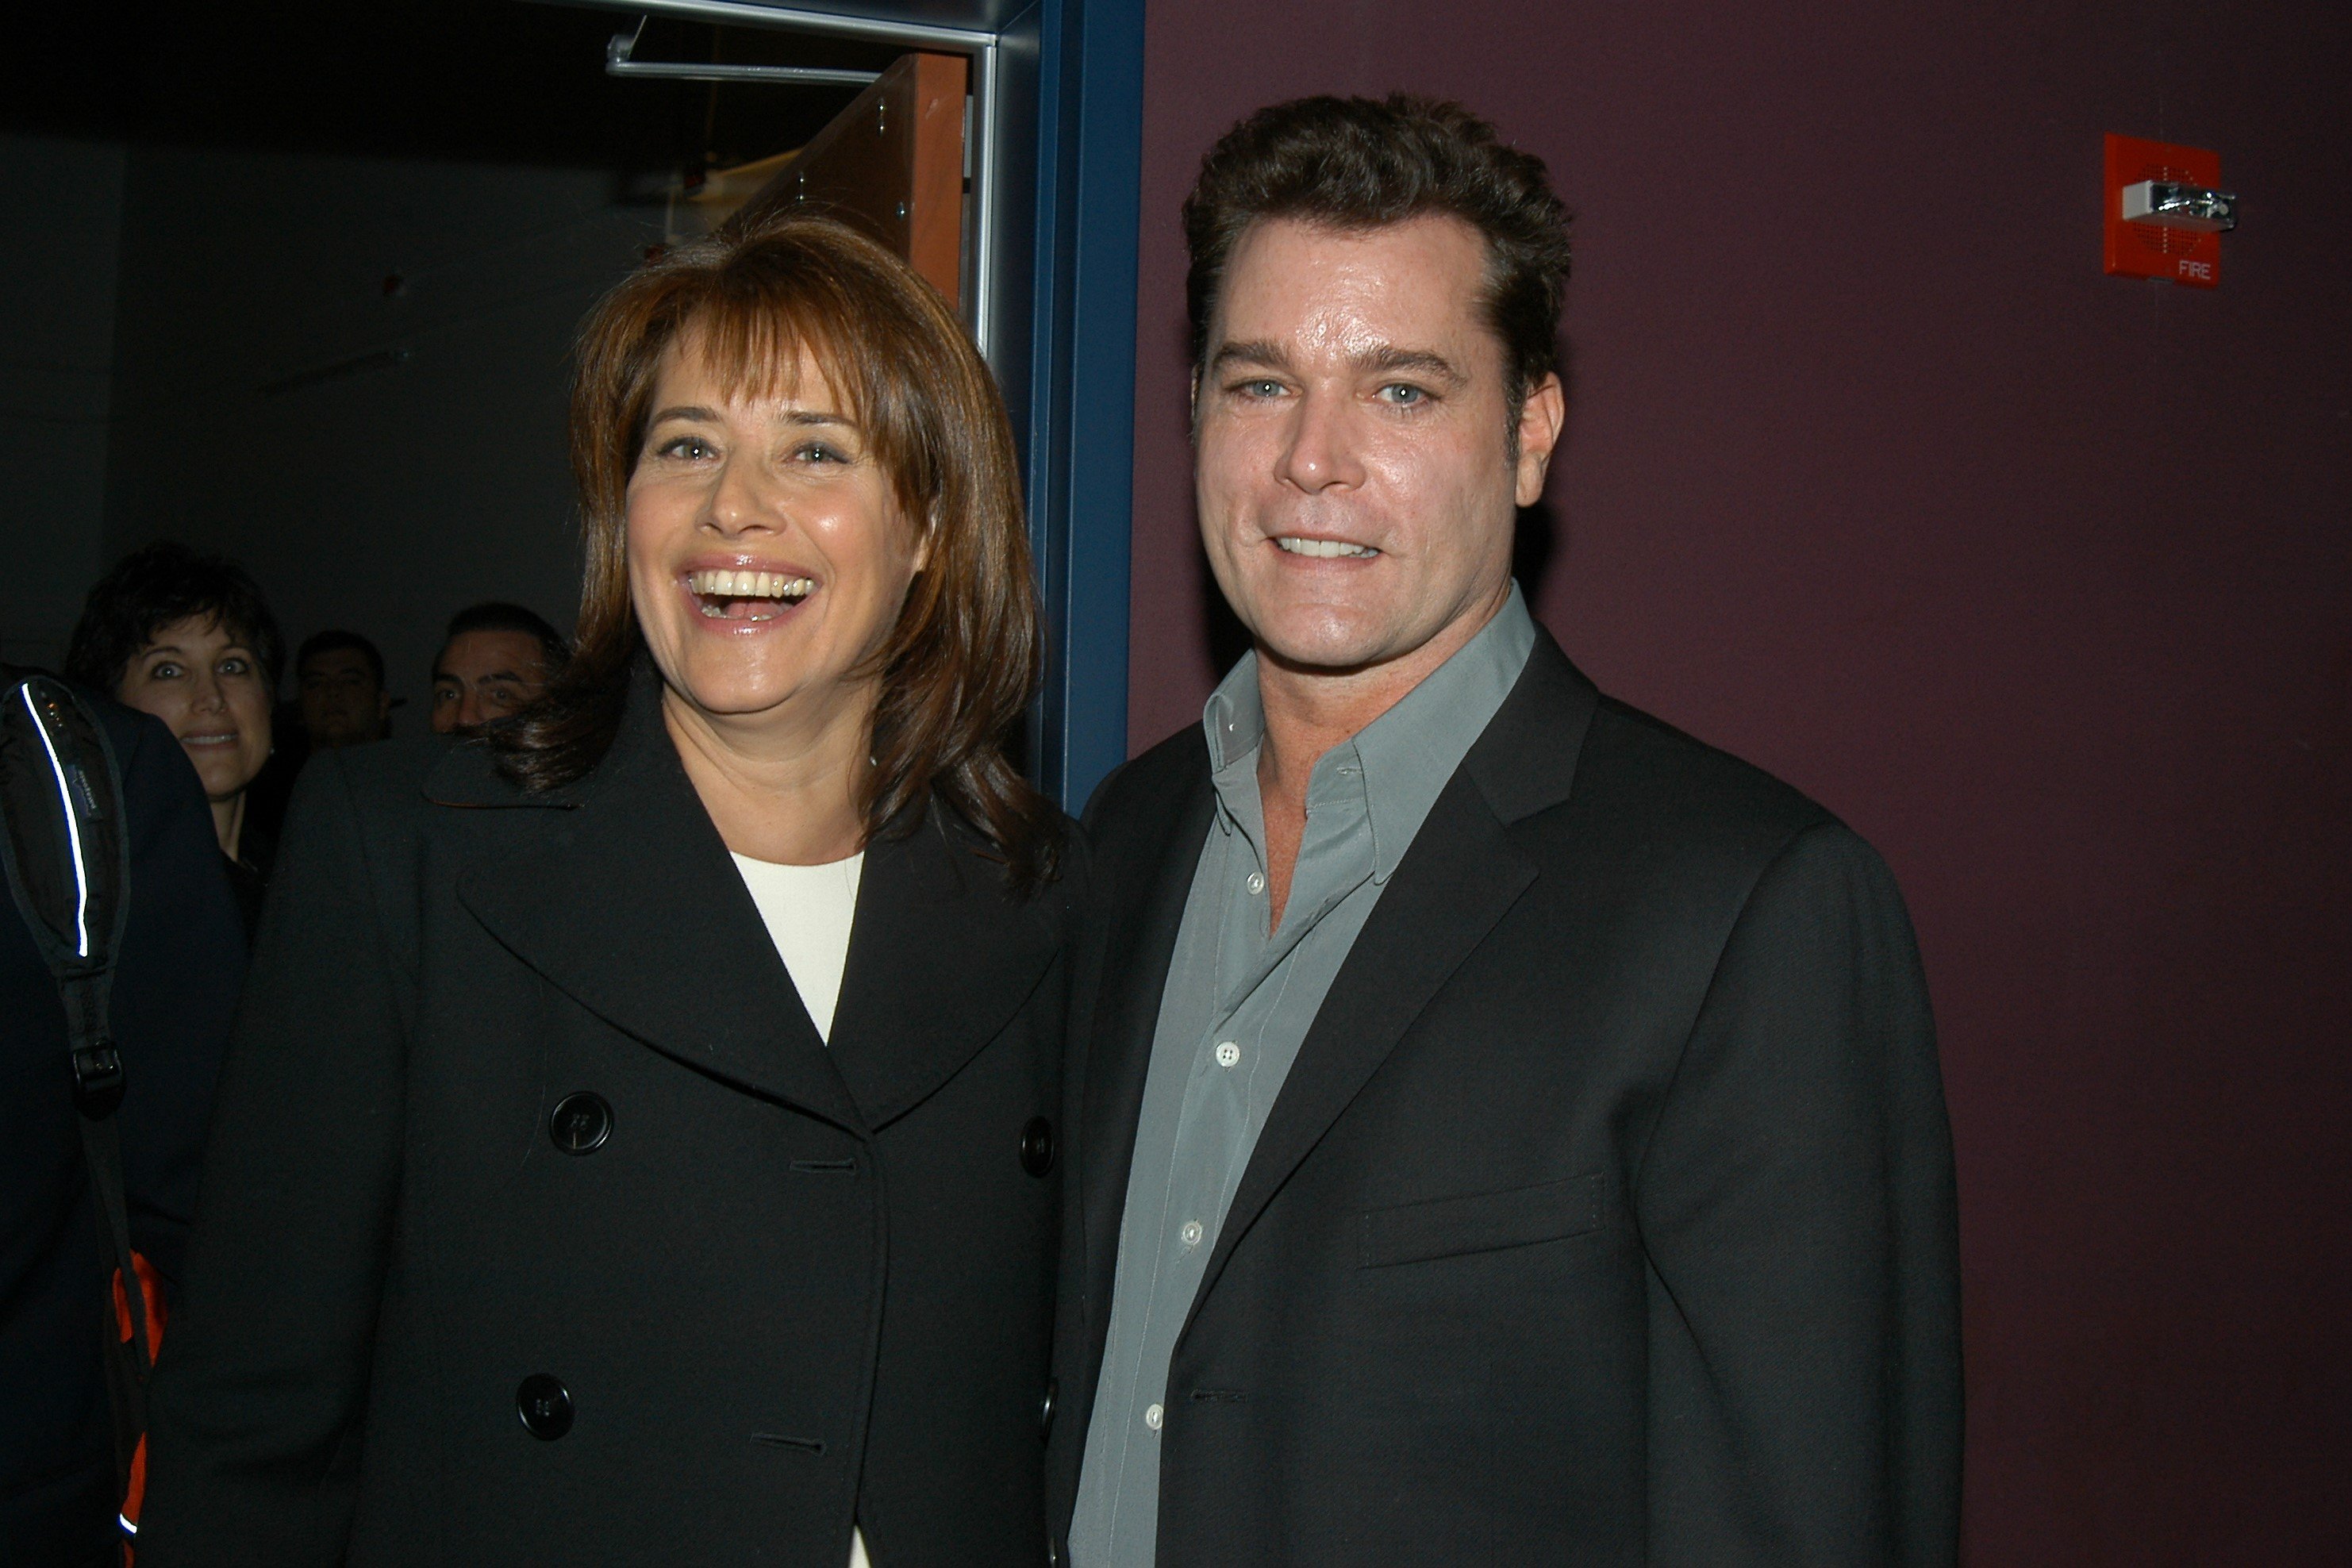 Lorraine Bracco, in a black jacket, and Ray Liotta, in a black suit jacket and grey shirt, at a screening of their movie 'Goodfellas' in 1990.